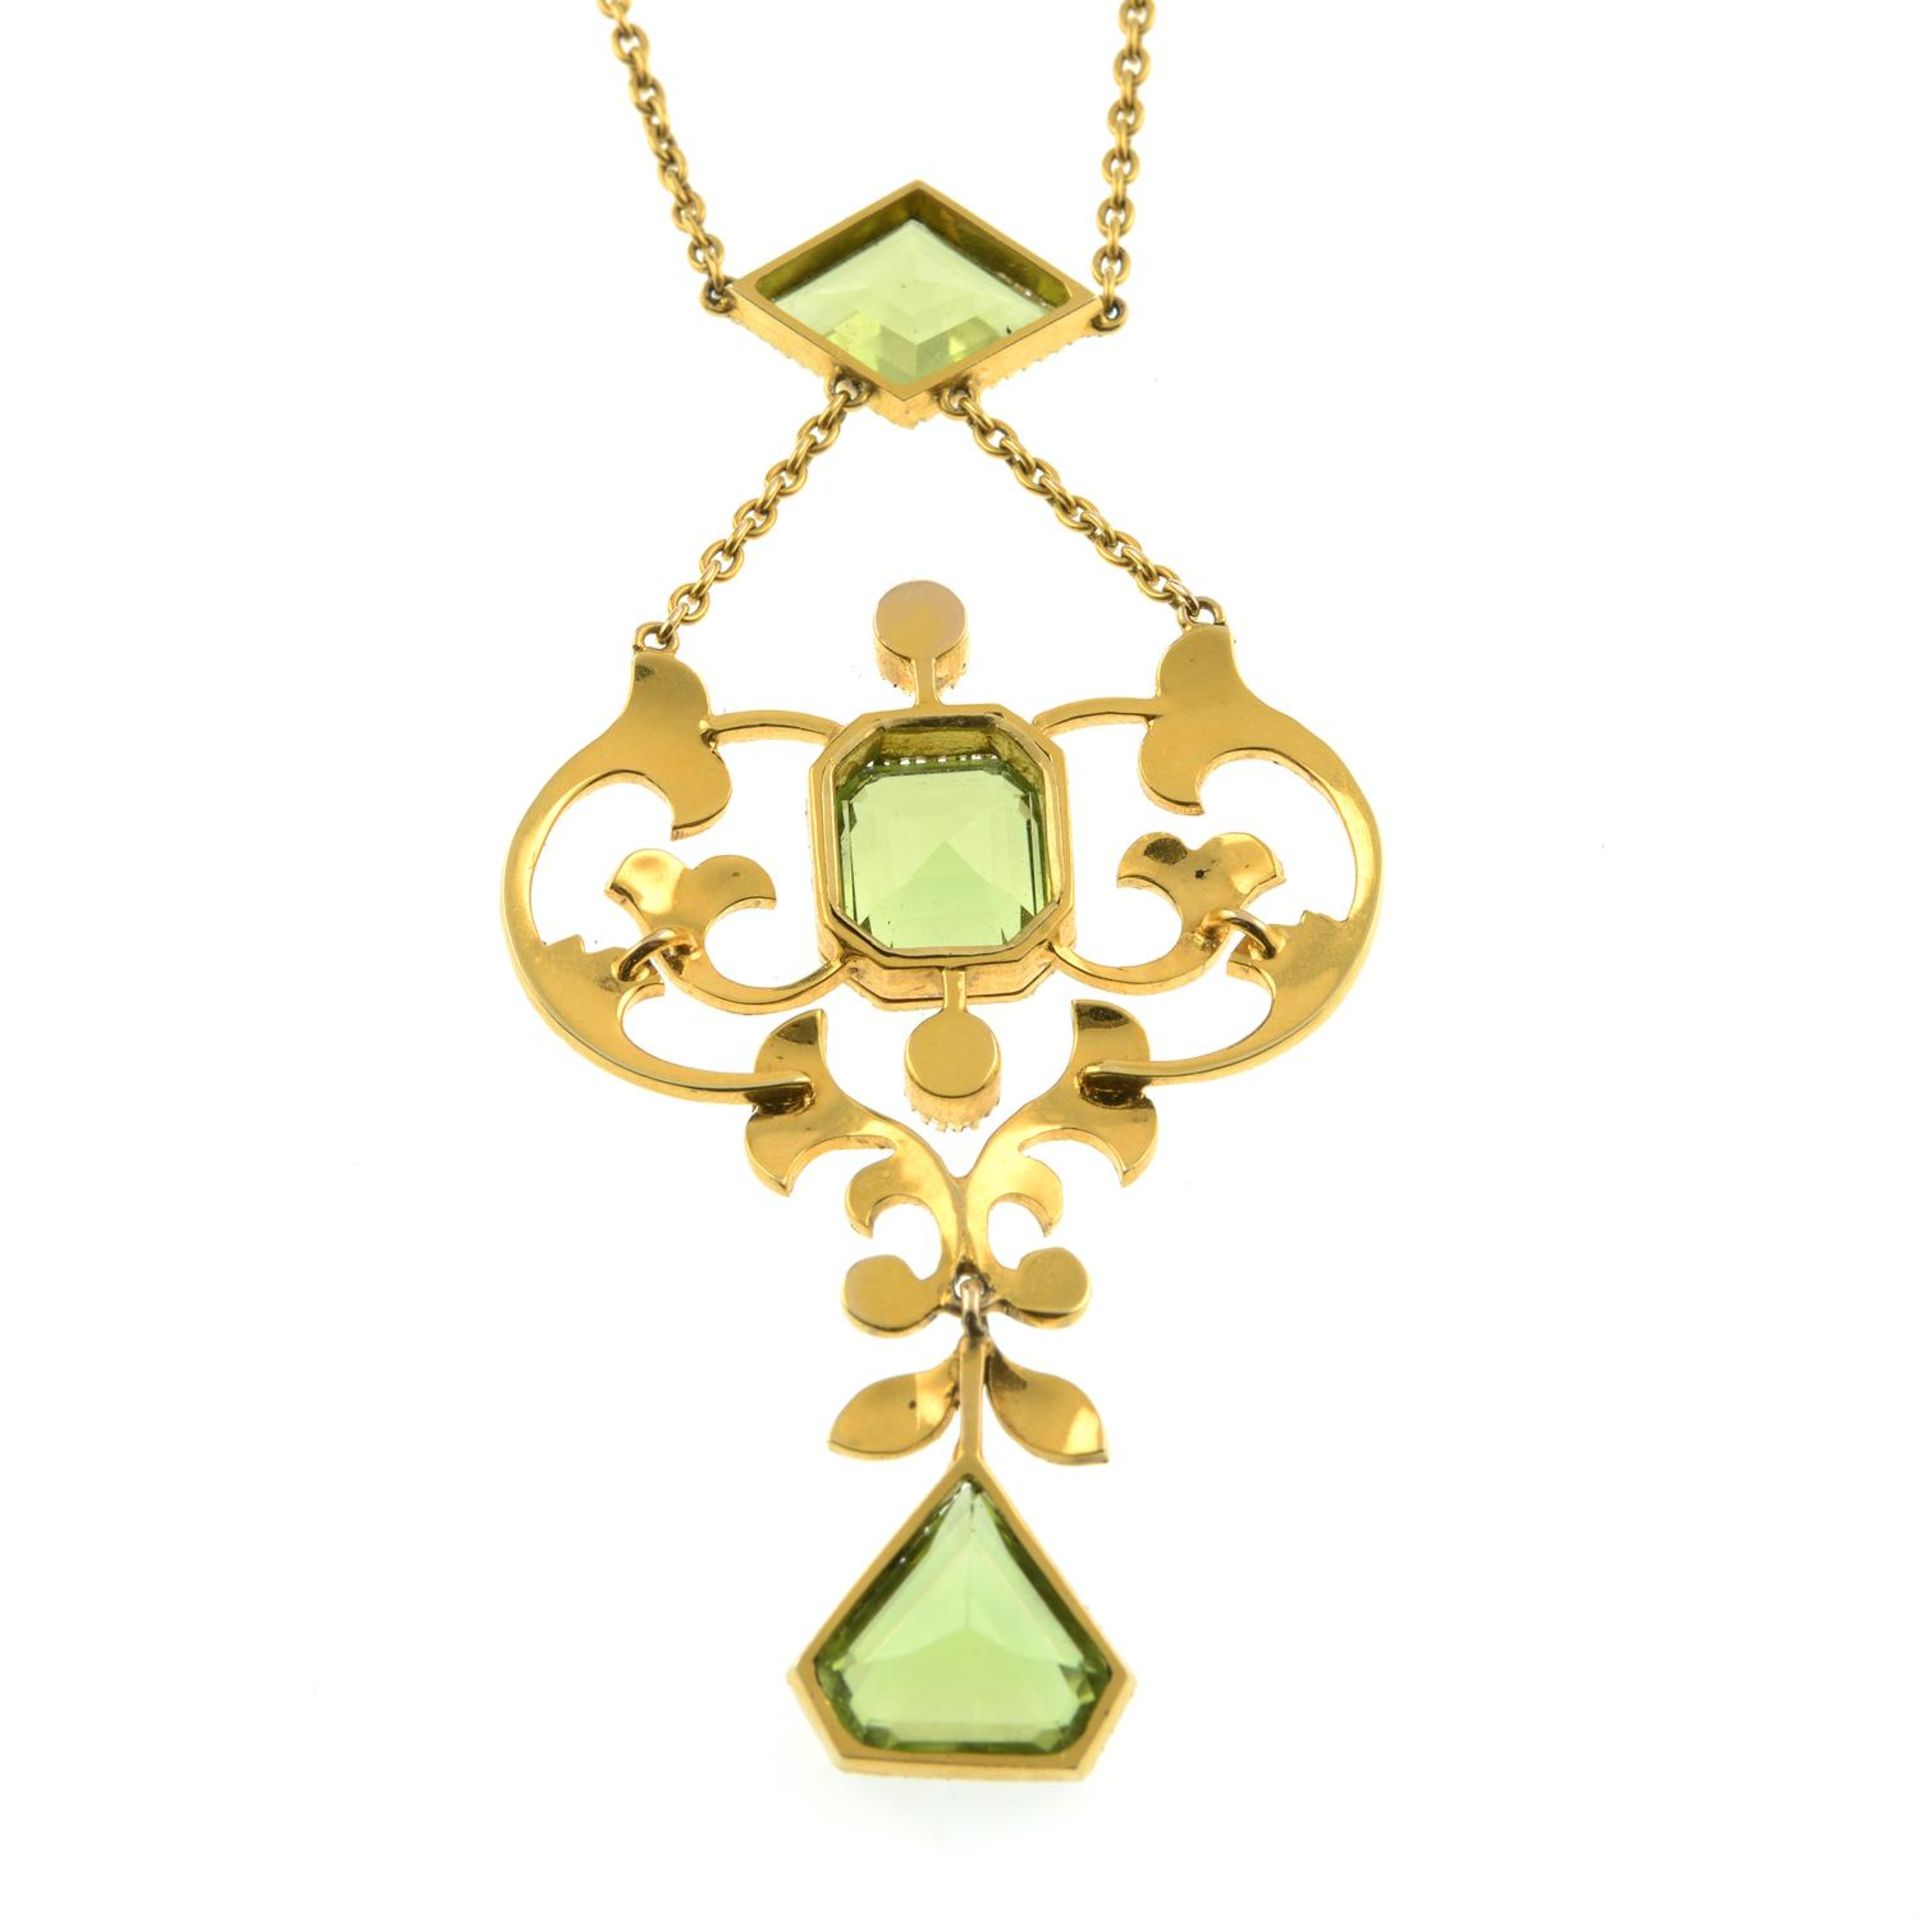 An Edwardian 15ct gold peridot and split pearl pendant necklace, with fitted case. - Image 3 of 6